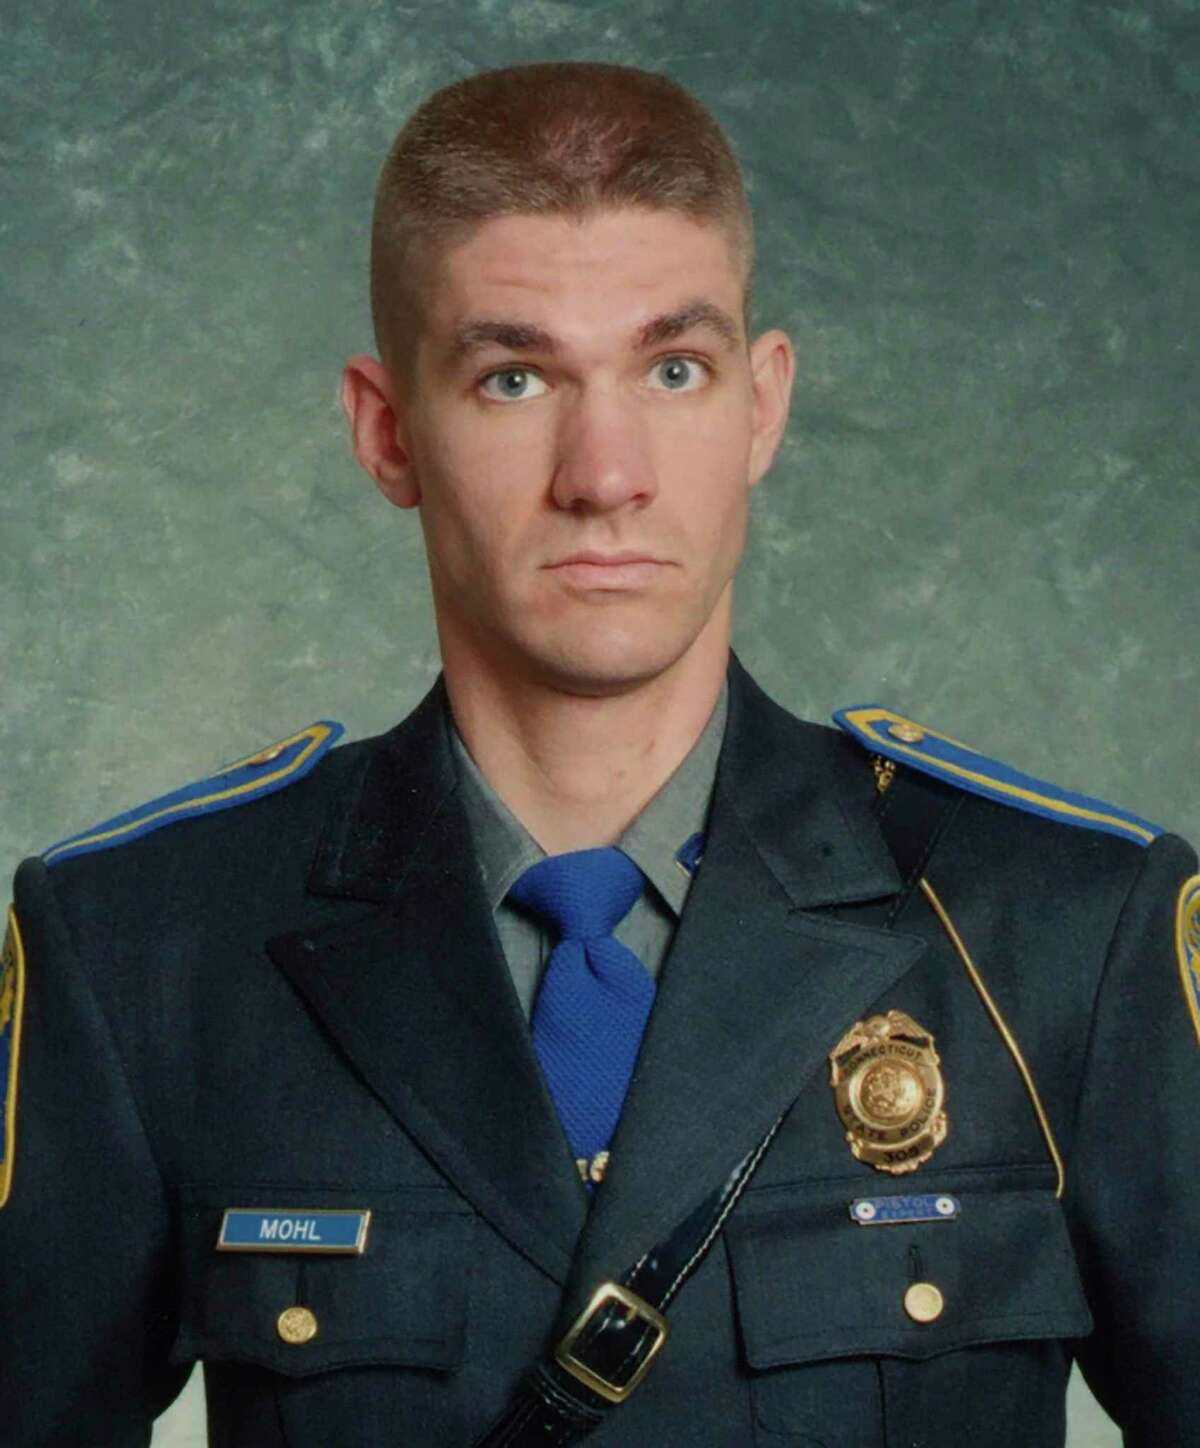 This undated photo provided by the Connecticut State Police shows Sgt. Brian Mohl, a 26-year veteran of their Woodbury department. Mohl called for help about 3:30 a.m. Thursday, Sept. 2, 2021. His cruiser had been swept away. Police searched the area with divers, helicopters, boats and drones. After daybreak, they found his body in the swollen river after the remnants of Hurricane Ida pummeled the Northeast with record-breaking rain that flooded roads and houses, killing dozens. (Connecticut State Police via AP)